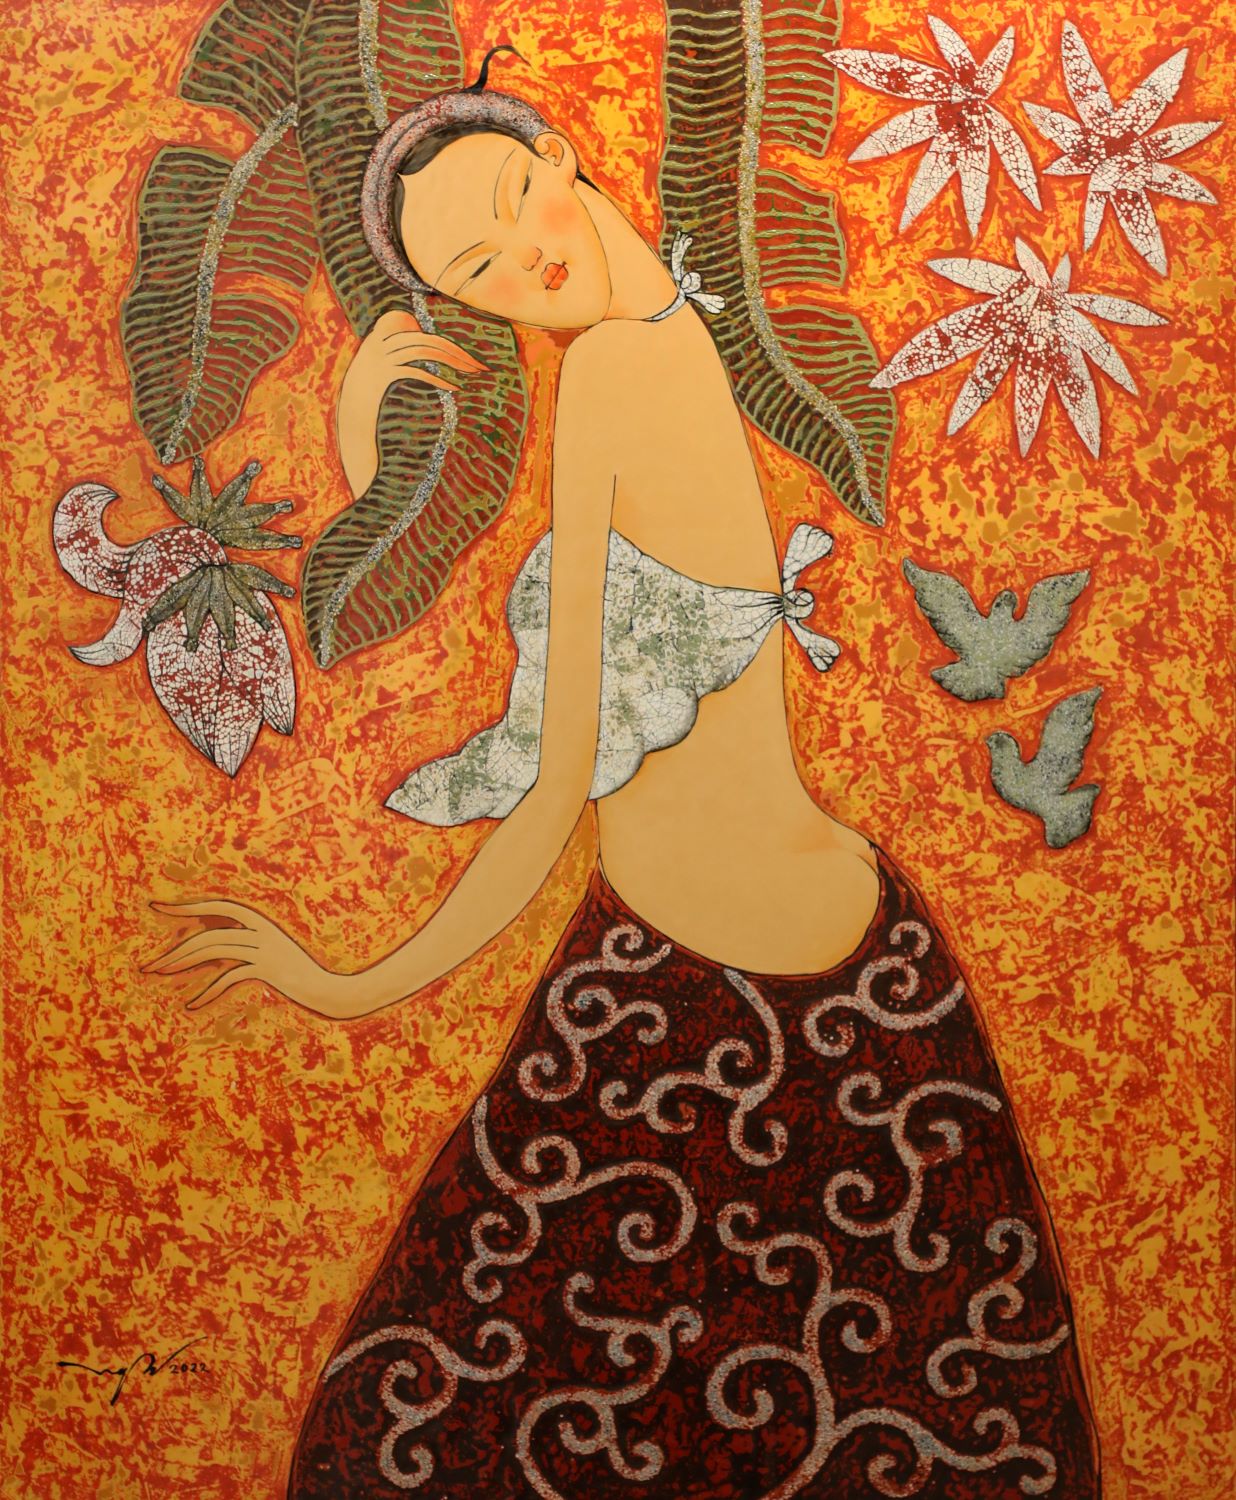 Past Curve XIV - Vietnamese Lacquer Painting by Artist Nguyen Duc Huy